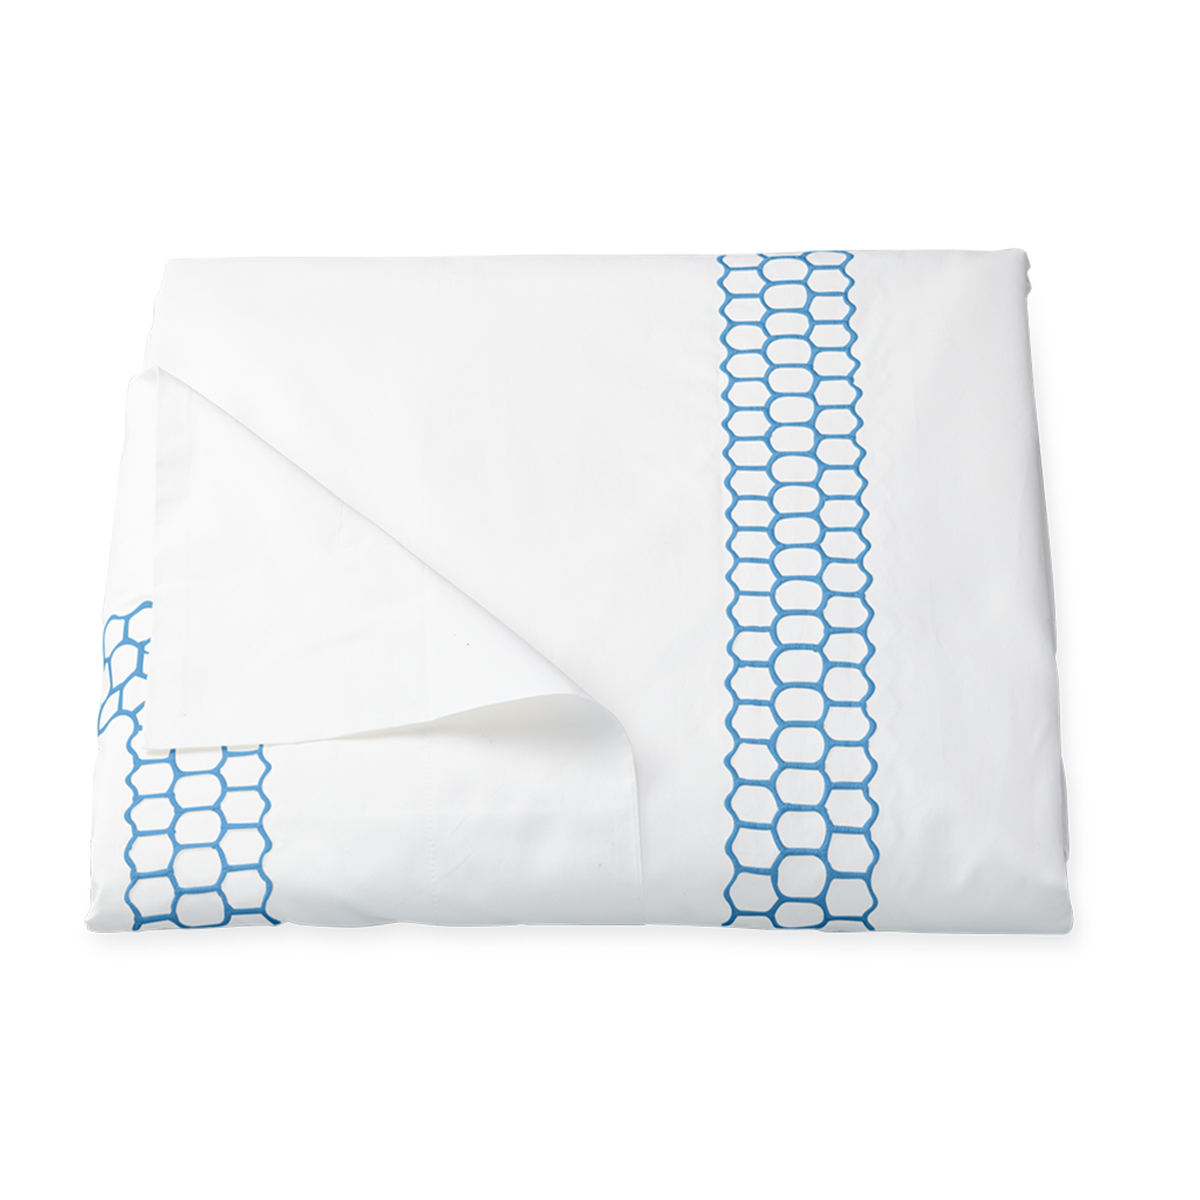 Clear Image of Matouk Liana Bedding Duvet Cover in Ocean Color